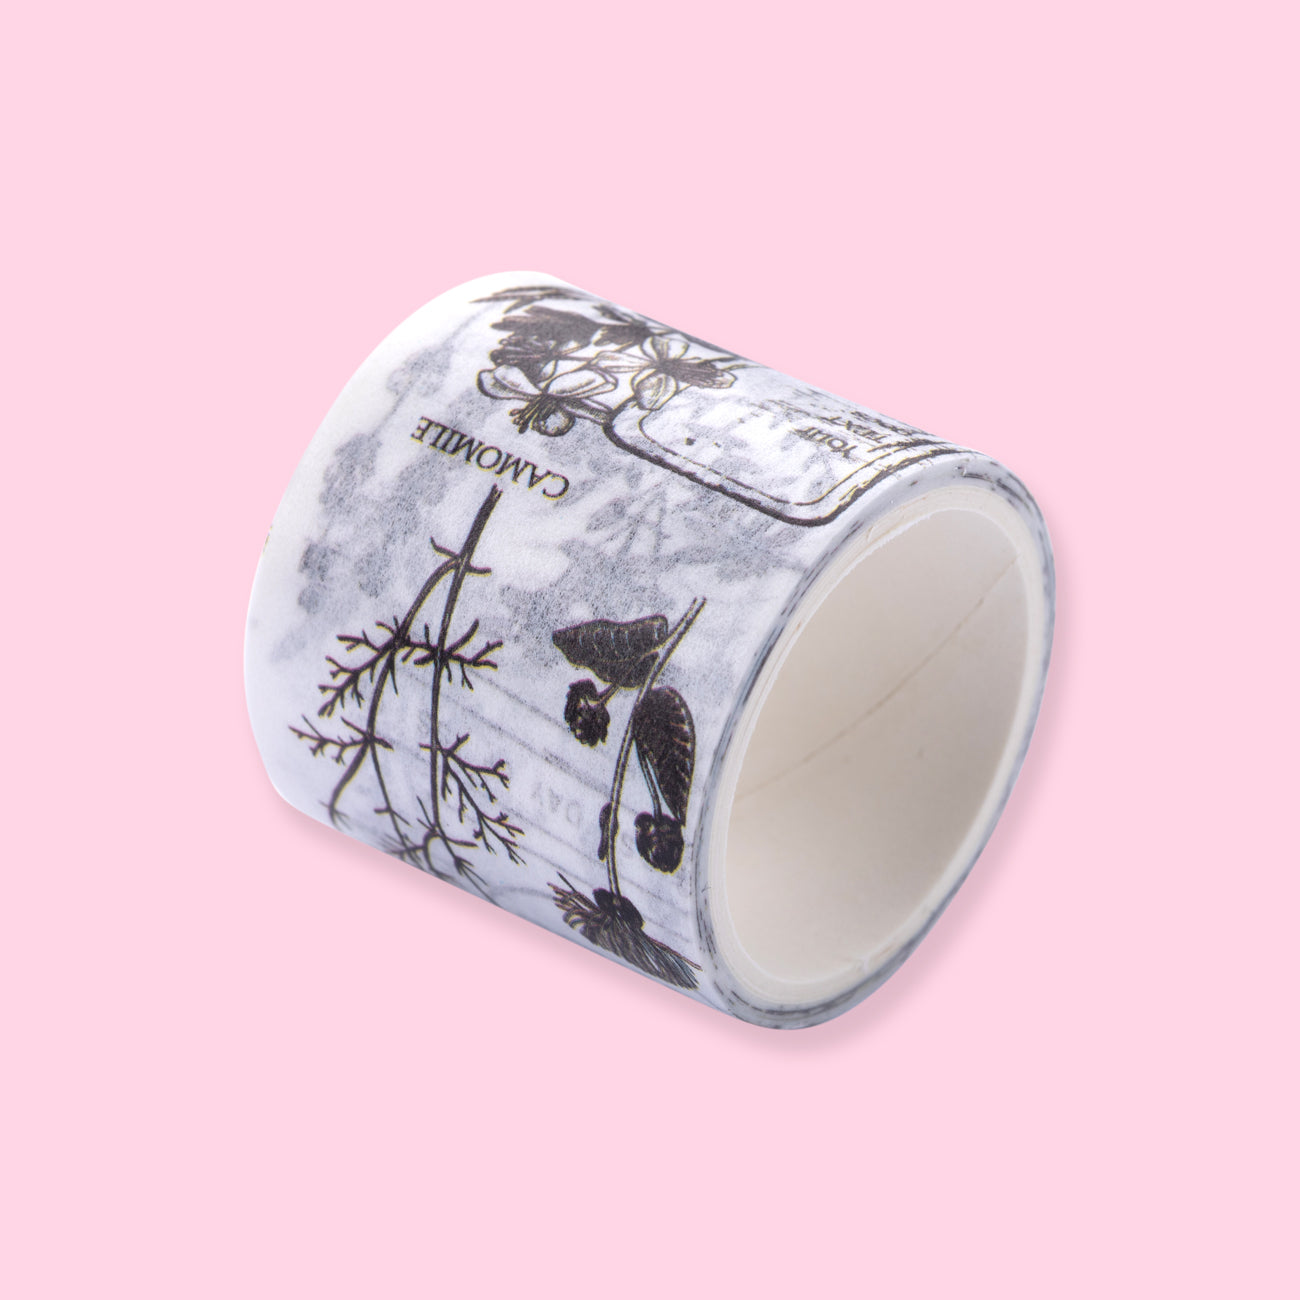 Tape - Mysterious World High-Grade Hot Stamping Washi Tape Set